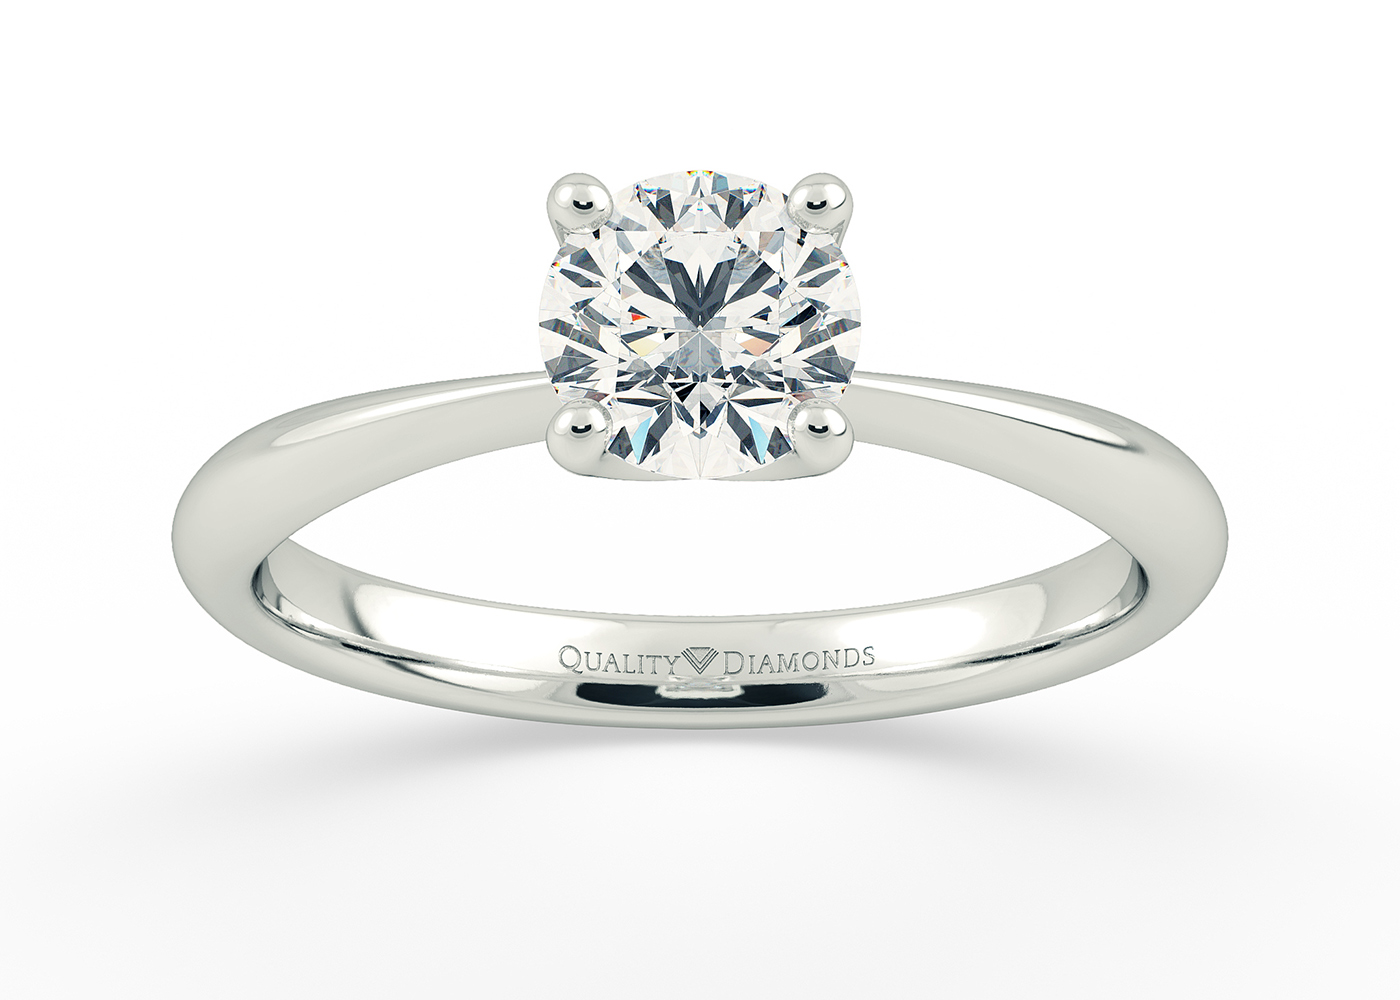 One Carat Round Brilliant Solitaire Diamond Engagement Ring in 18K White Gold